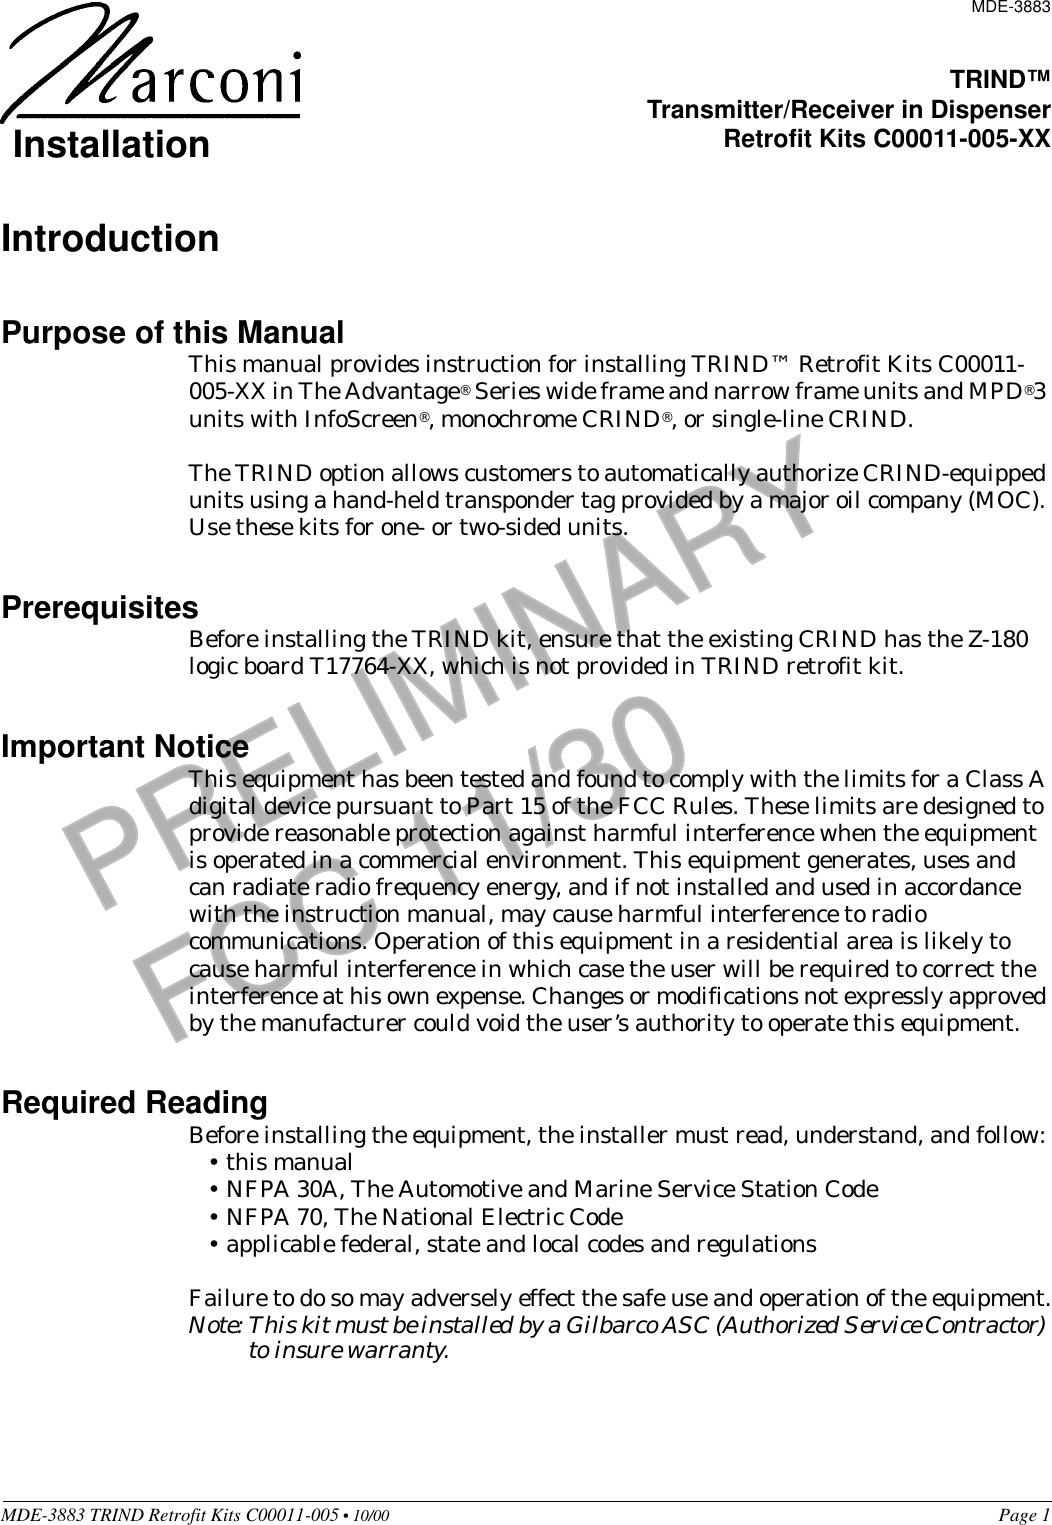 PRELIMINARYFCC 11/30MDE-3883 TRIND Retrofit Kits C00011-005 • 10/00   Page 1IntroductionPurpose of this ManualThis manual provides instruction for installing TRIND™ Retrofit Kits C00011-005-XX in The Advantage® Series wide frame and narrow frame units and MPD®3 units with InfoScreen®, monochrome CRIND®, or single-line CRIND. The TRIND option allows customers to automatically authorize CRIND-equipped units using a hand-held transponder tag provided by a major oil company (MOC). Use these kits for one- or two-sided units.PrerequisitesBefore installing the TRIND kit, ensure that the existing CRIND has the Z-180 logic board T17764-XX, which is not provided in TRIND retrofit kit.Important NoticeThis equipment has been tested and found to comply with the limits for a Class A digital device pursuant to Part 15 of the FCC Rules. These limits are designed to provide reasonable protection against harmful interference when the equipment is operated in a commercial environment. This equipment generates, uses and can radiate radio frequency energy, and if not installed and used in accordance with the instruction manual, may cause harmful interference to radio communications. Operation of this equipment in a residential area is likely to cause harmful interference in which case the user will be required to correct the interference at his own expense. Changes or modifications not expressly approved by the manufacturer could void the user’s authority to operate this equipment.Required ReadingBefore installing the equipment, the installer must read, understand, and follow:•this manual•NFPA 30A, The Automotive and Marine Service Station Code•NFPA 70, The National Electric Code•applicable federal, state and local codes and regulationsFailure to do so may adversely effect the safe use and operation of the equipment.Note: This kit must be installed by a Gilbarco ASC (Authorized Service Contractor) to insure warranty.MDE-3883TRIND™Transmitter/Receiver in DispenserRetrofit Kits C00011-005-XXInstallation